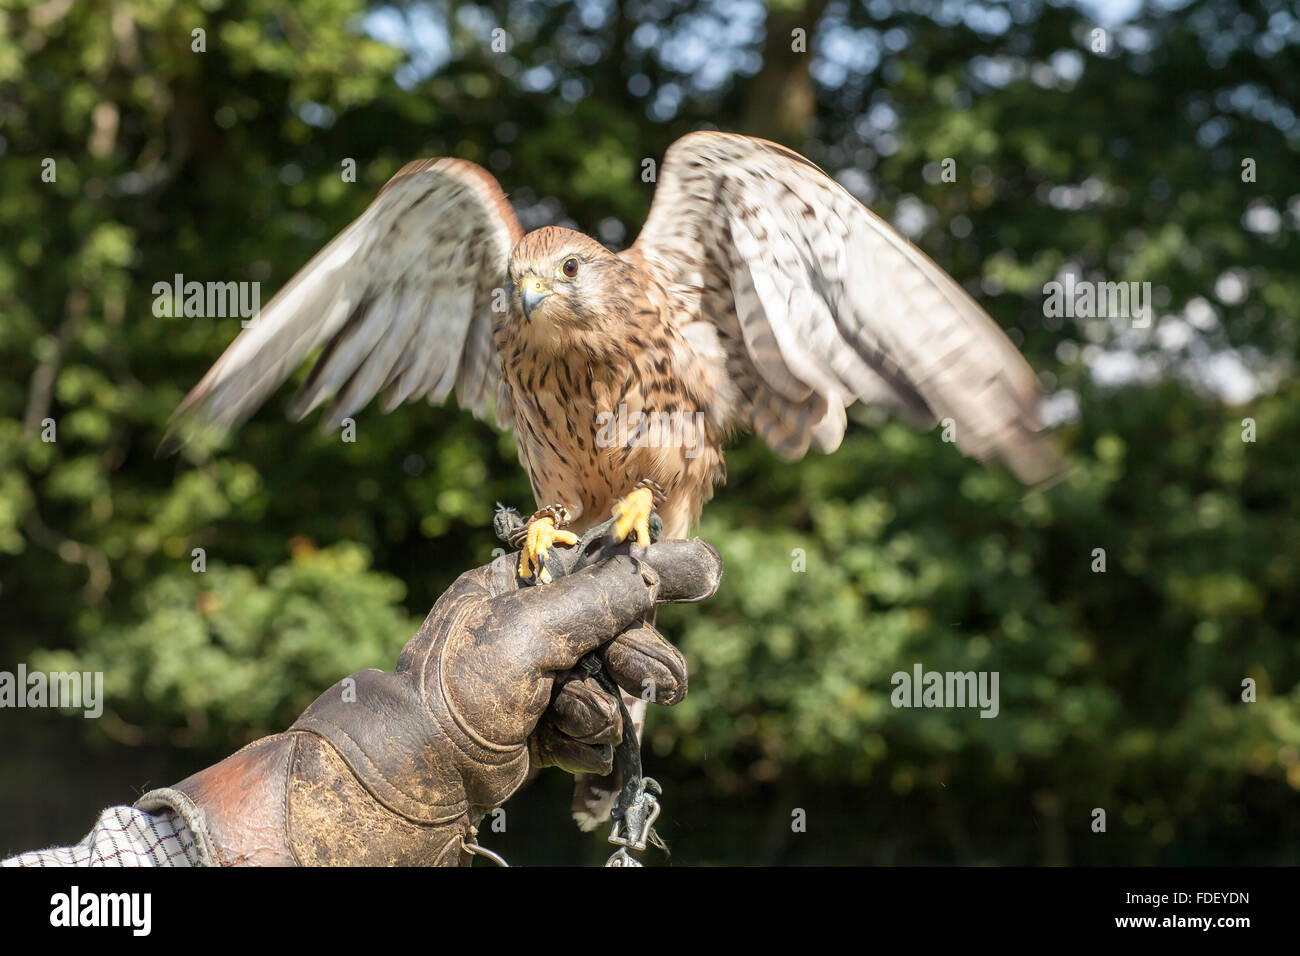 British Kestrel, full length on glove with wings extended.  (20 of 33) Stock Photo